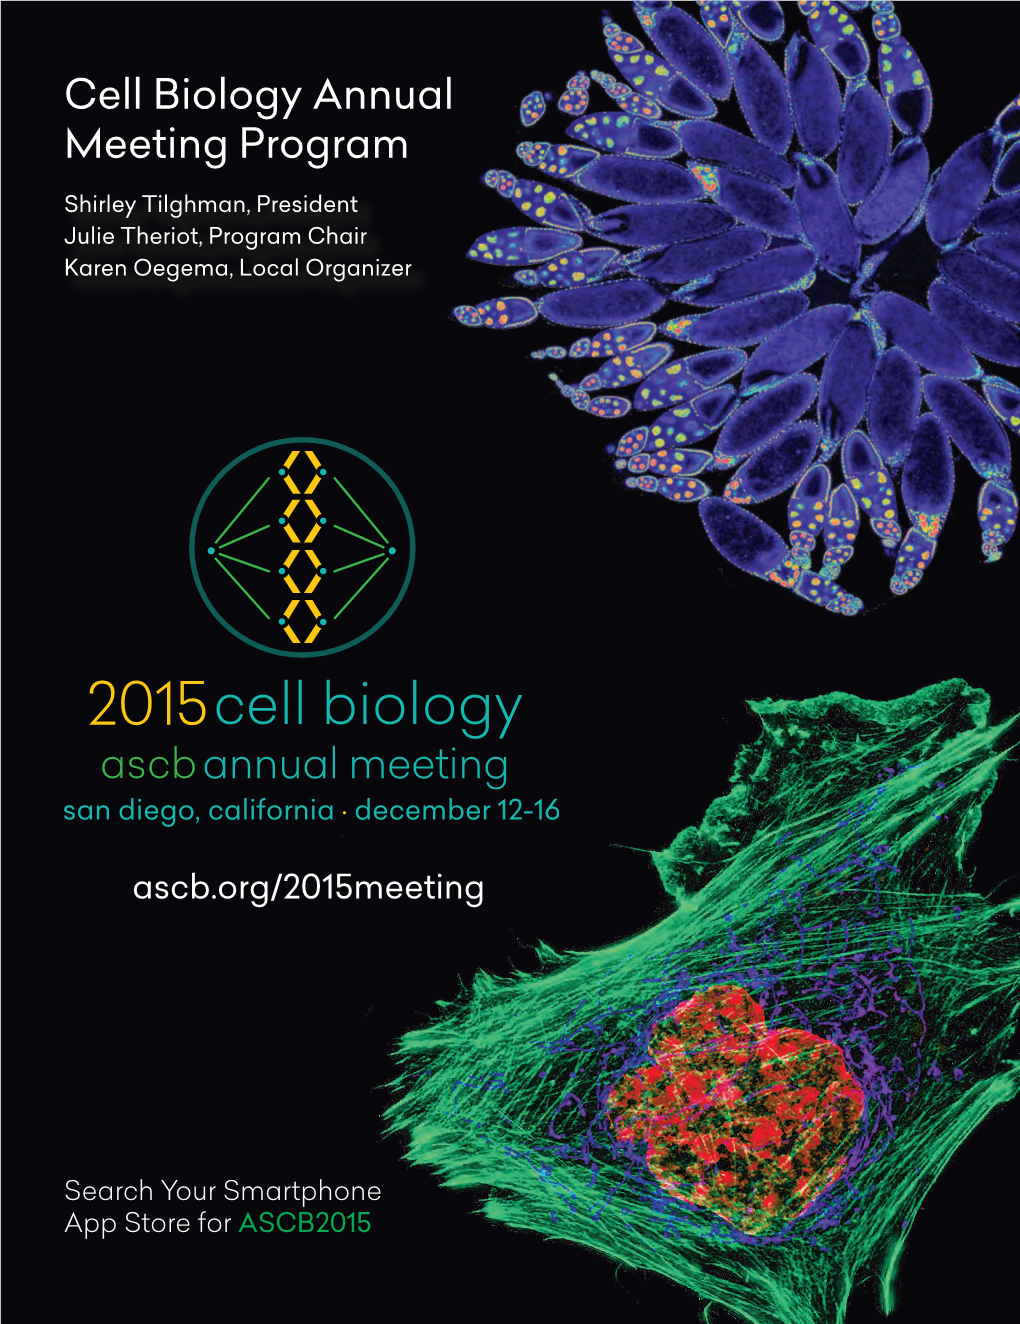 Cell Biology Annual Meeting Program